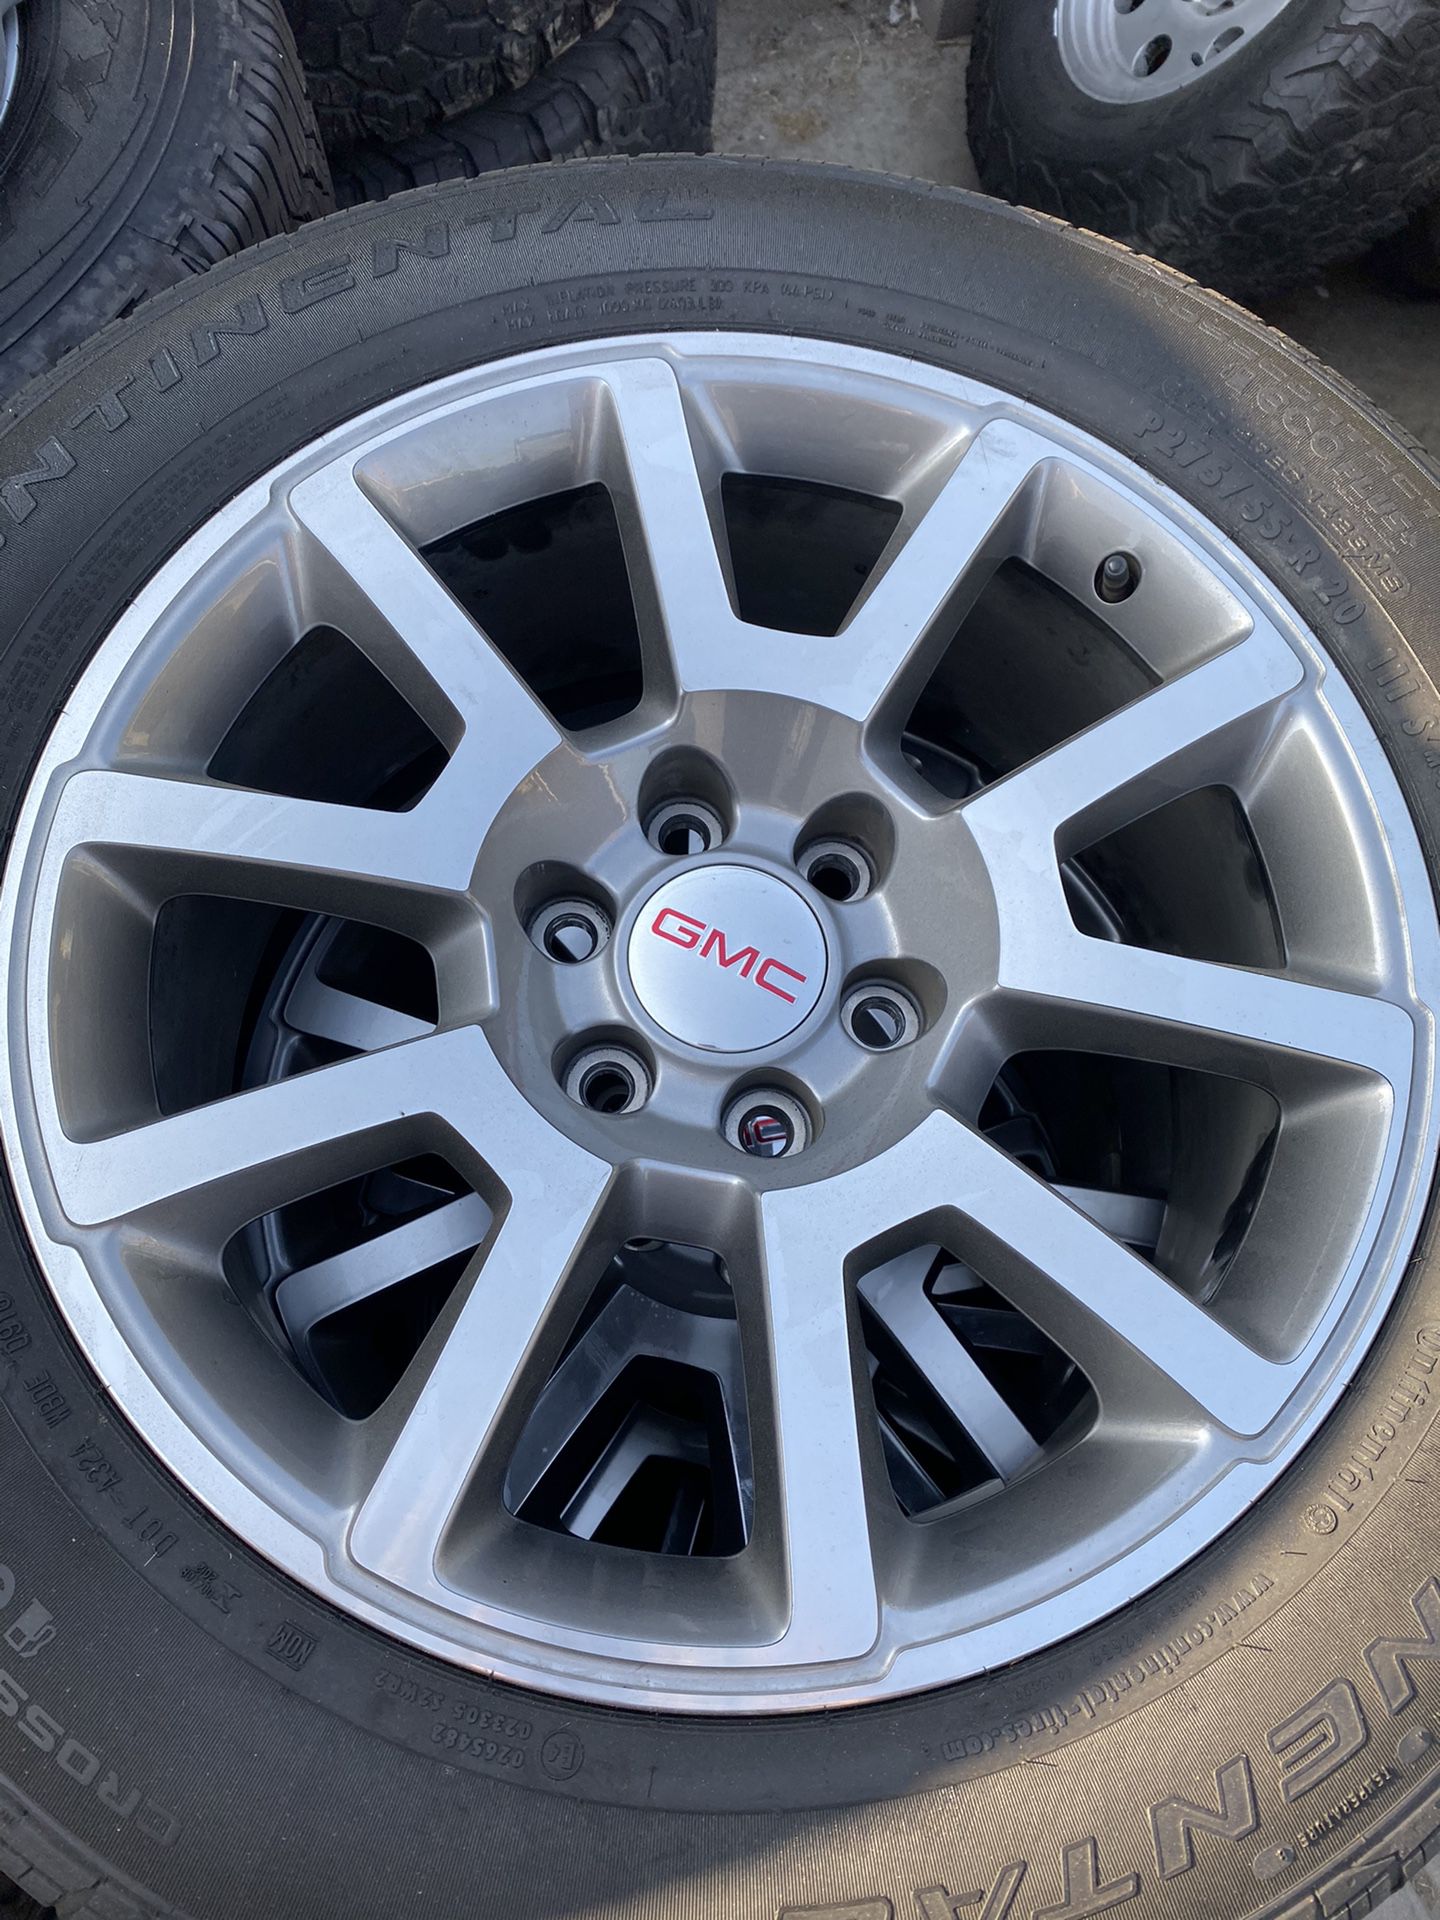 20 inch GMC Wheels with 275/55r20 Continental tires with low tread! Tire pressure sensors are in tact! Located in Buena Park!